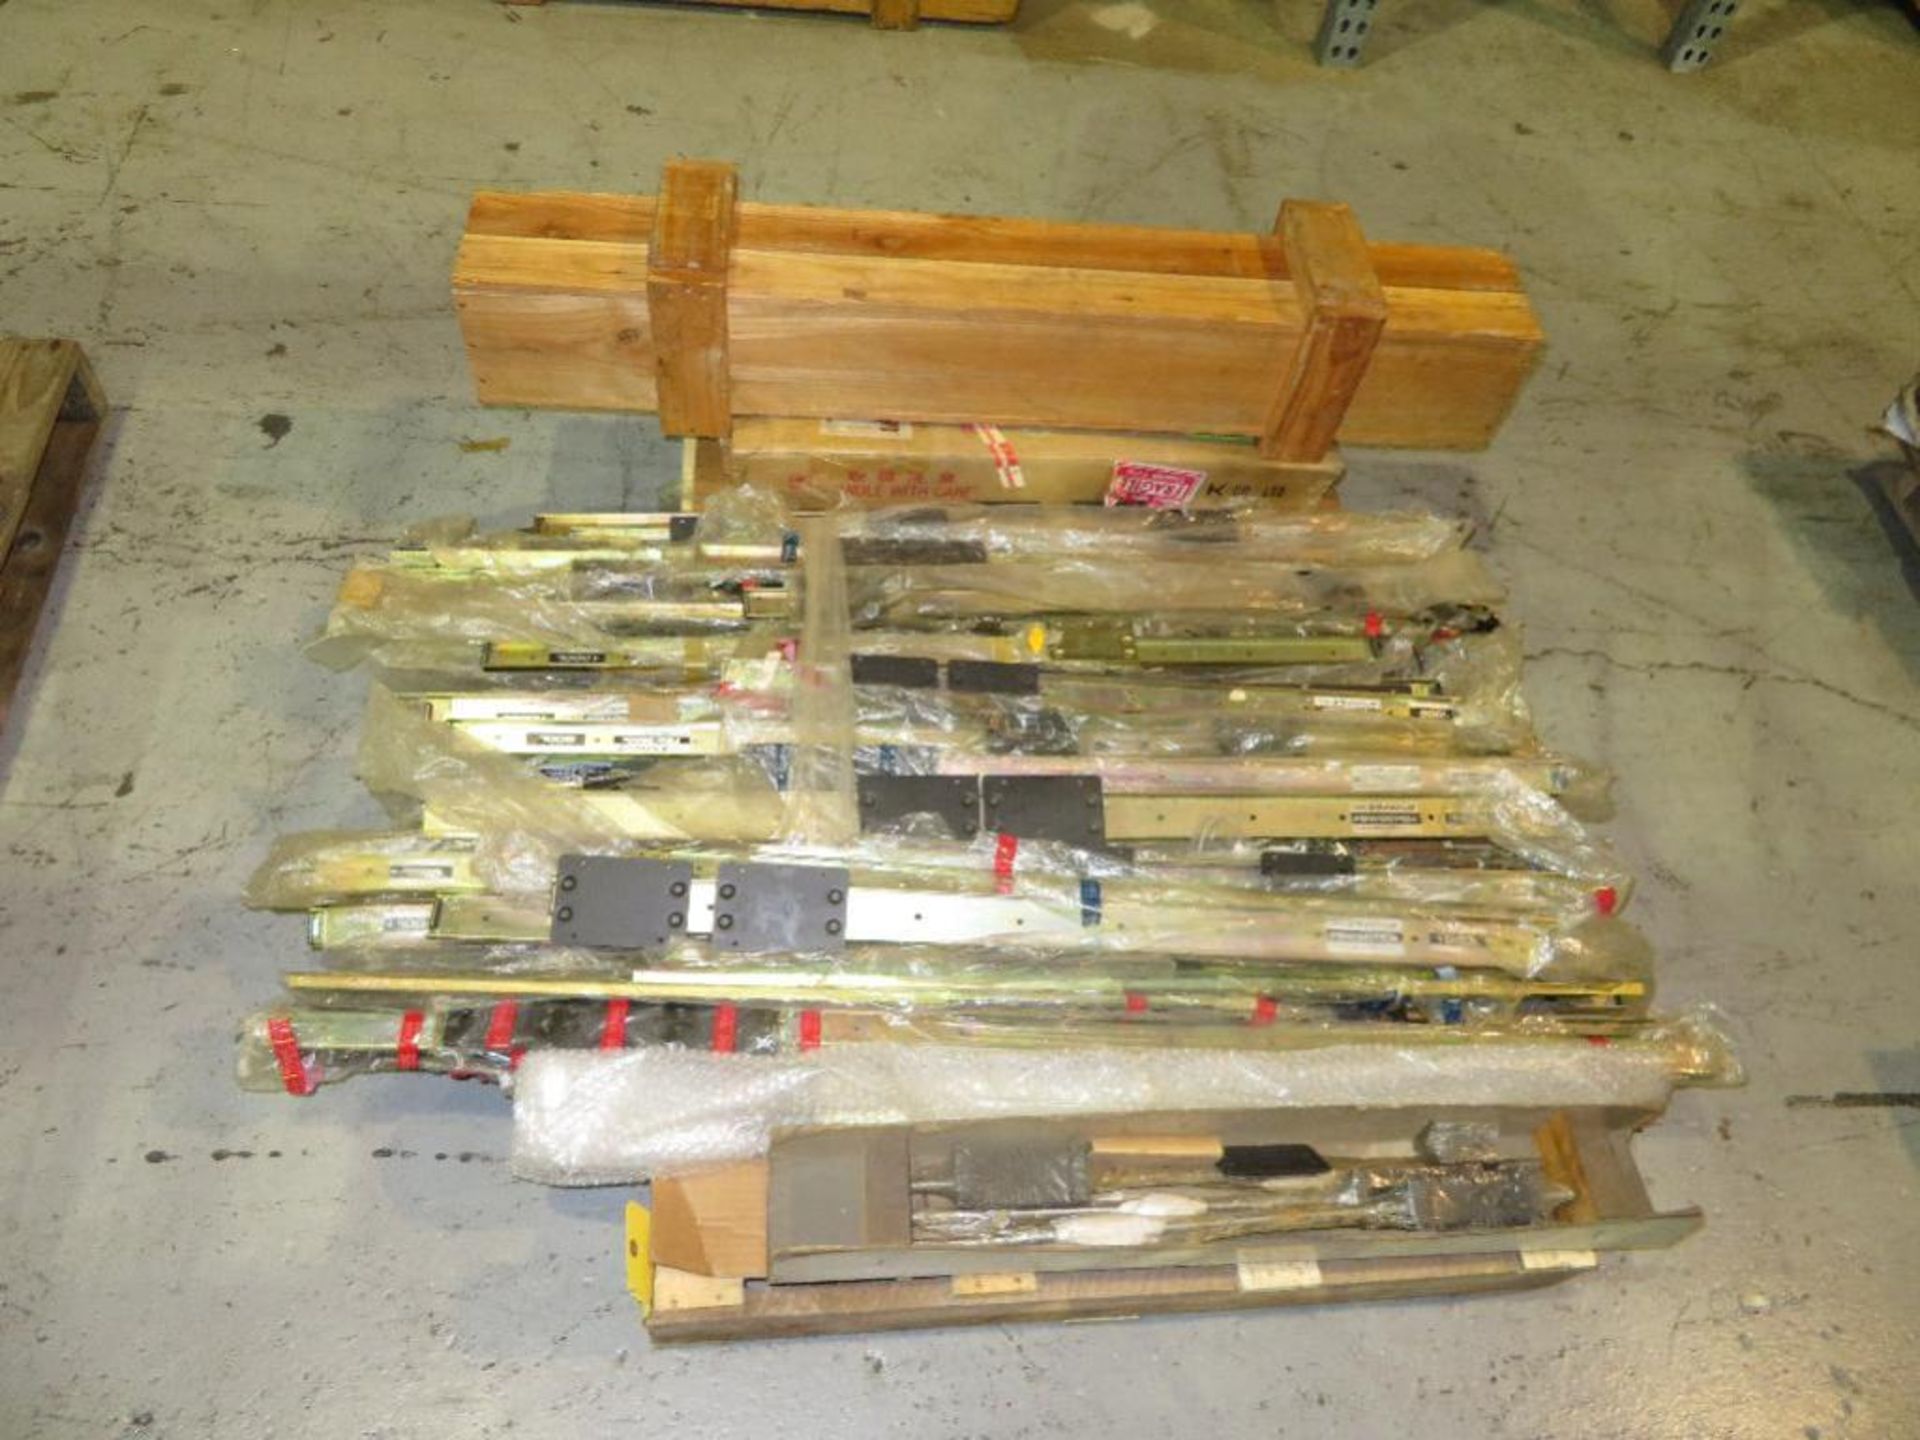 LOT: Assorted New Ways & Packs for Operating Machine Doors for Hitachi Seiki (approx. 30 units, many